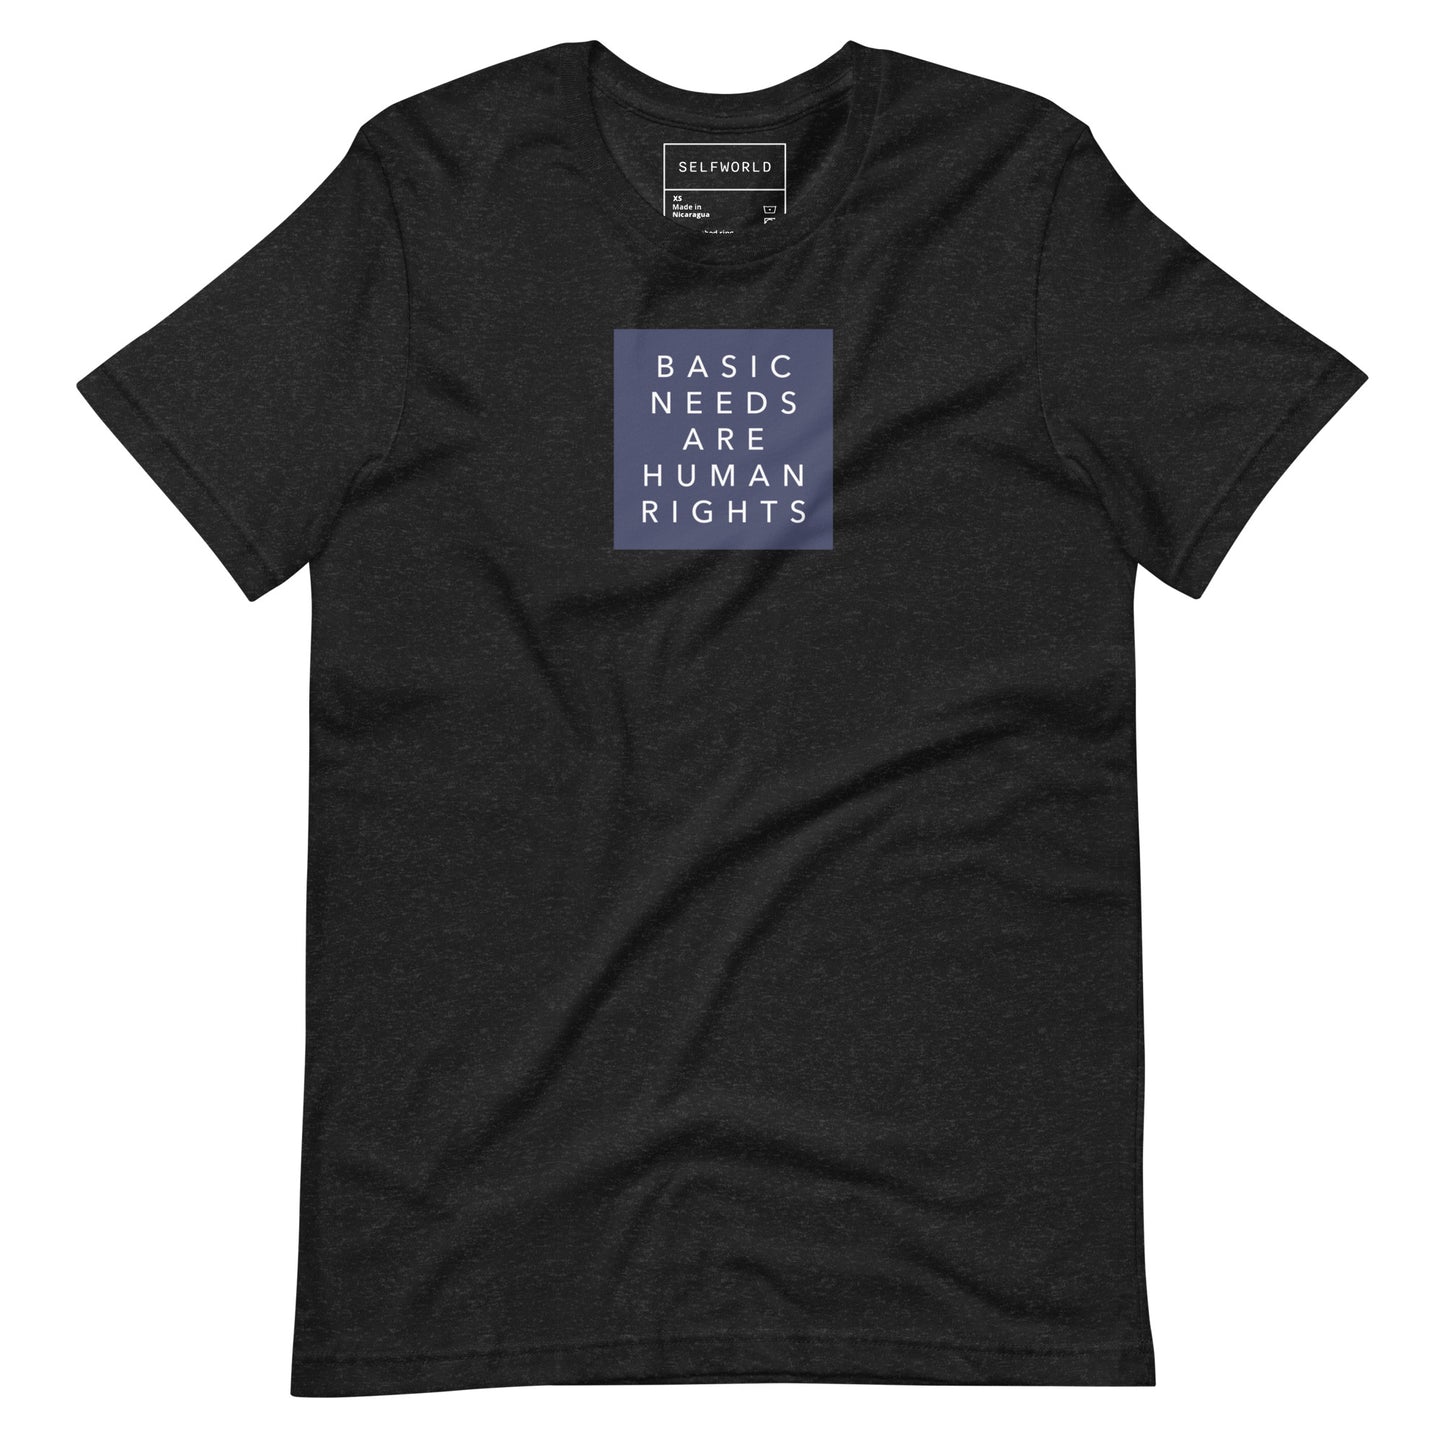 Basic Needs are Human Rights - Unisex t-shirt